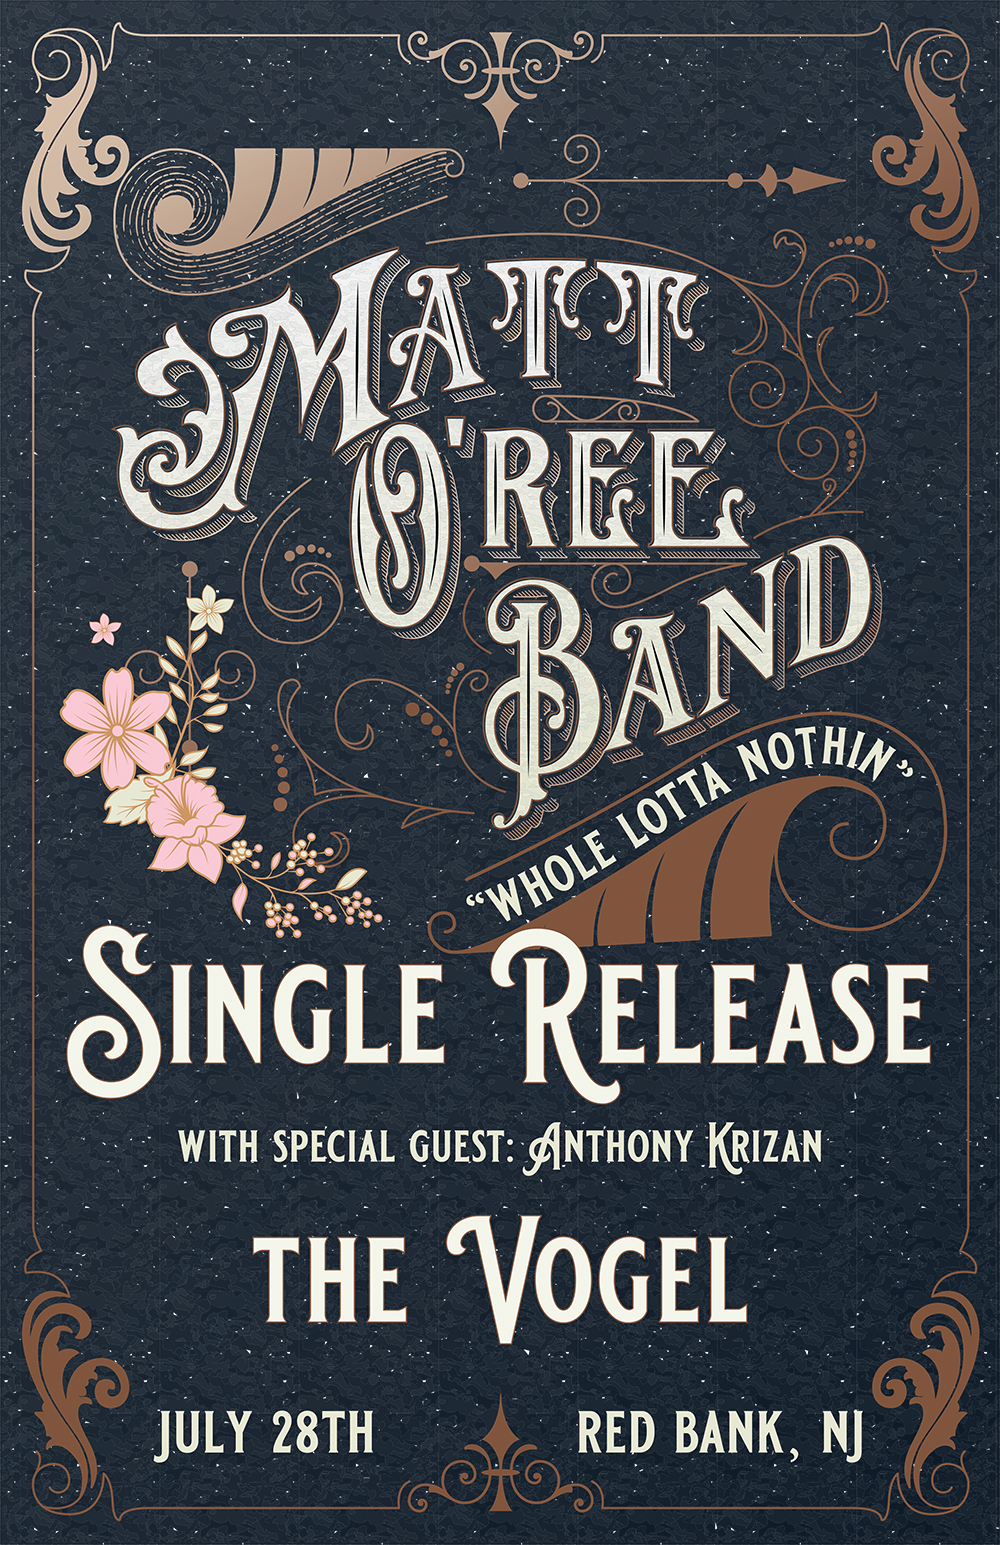 Matt O'Ree Band Single Release at The Vogel